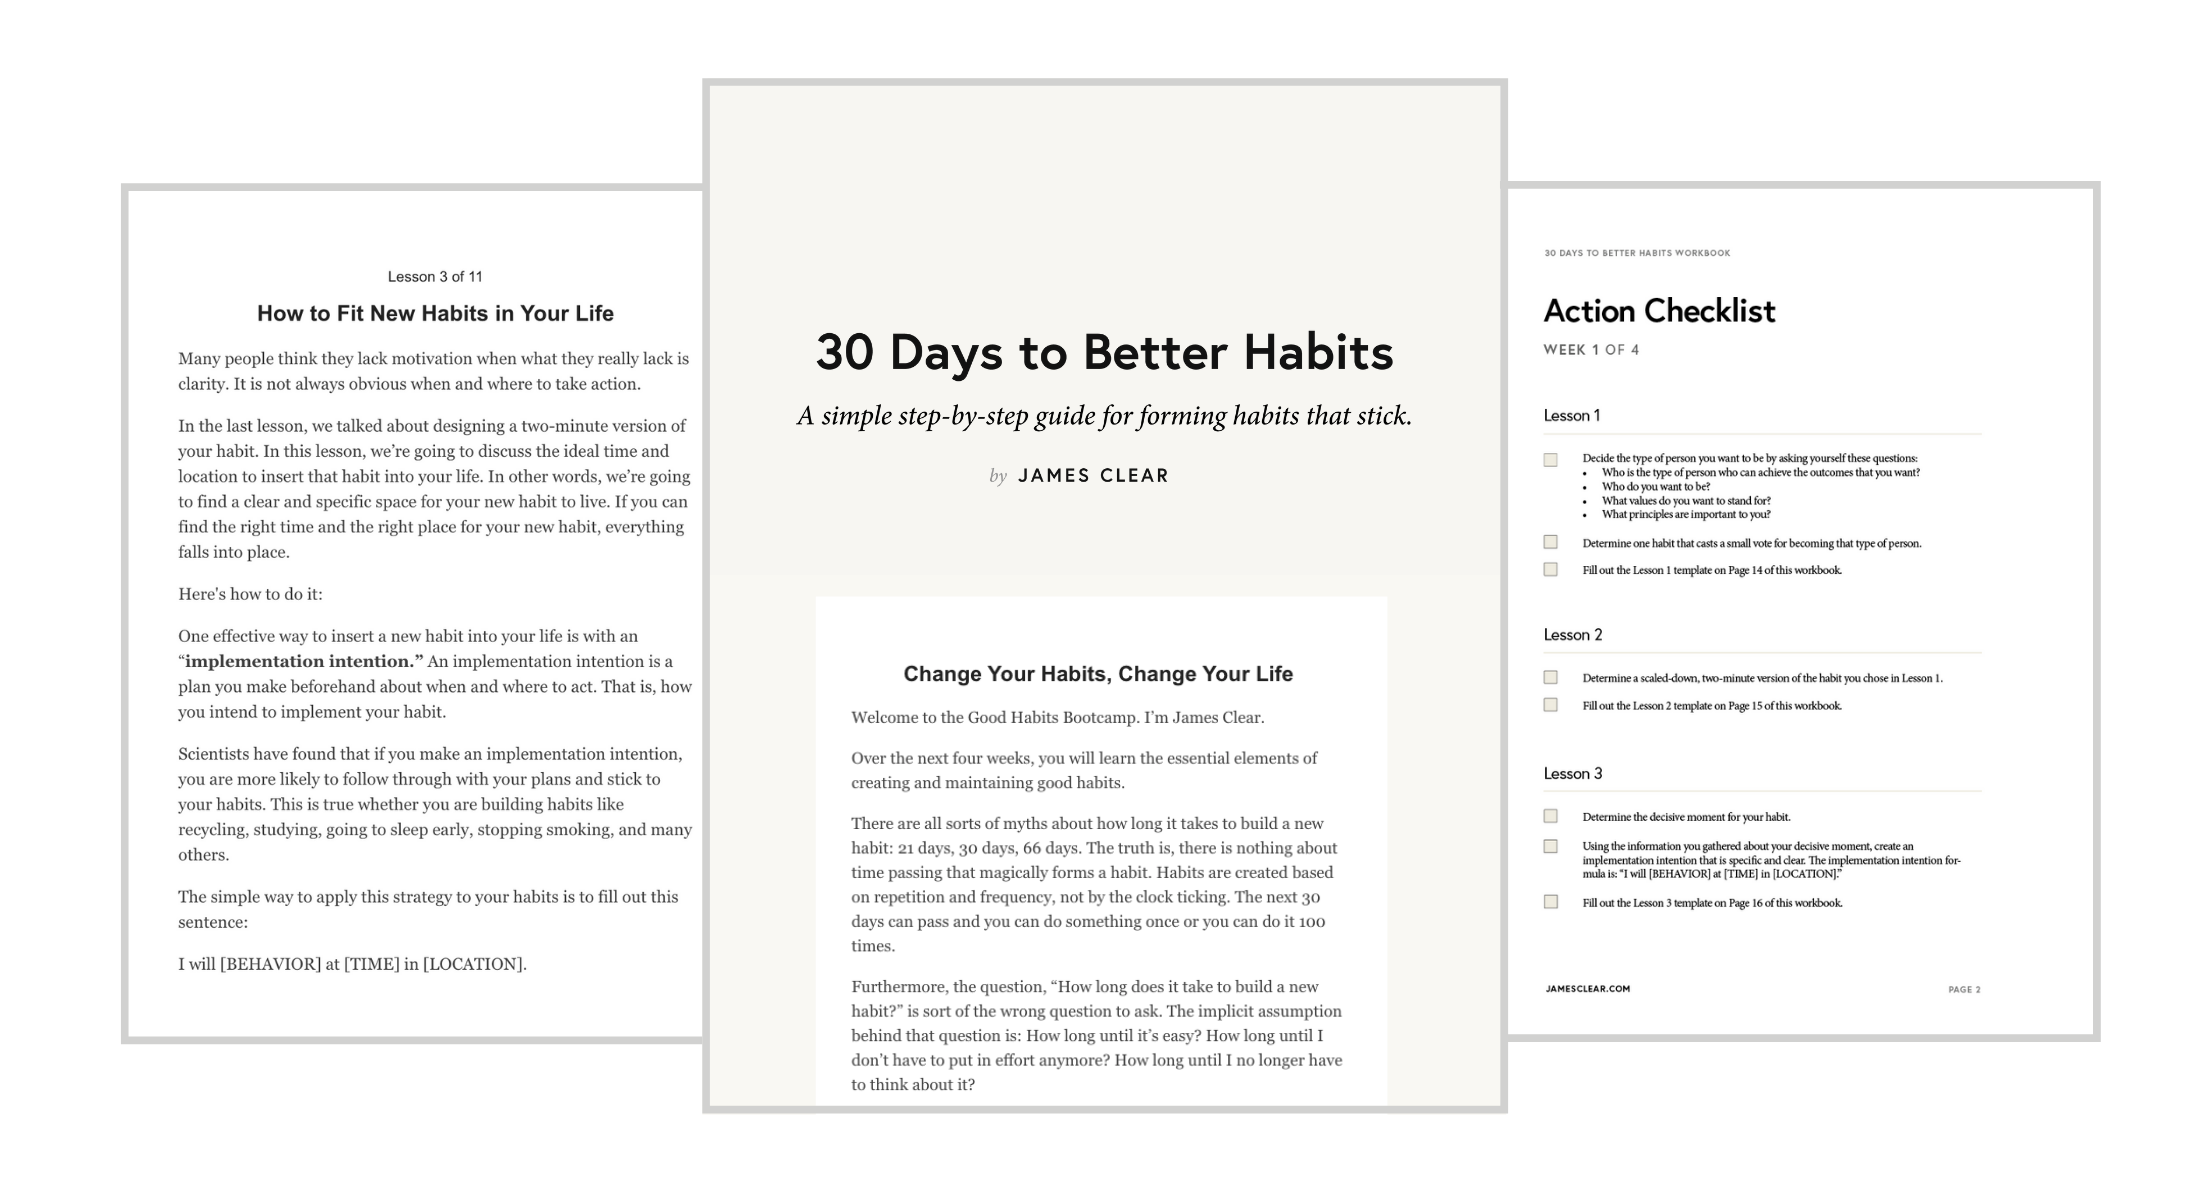 sign up for james clear s 30 days to better habits email course